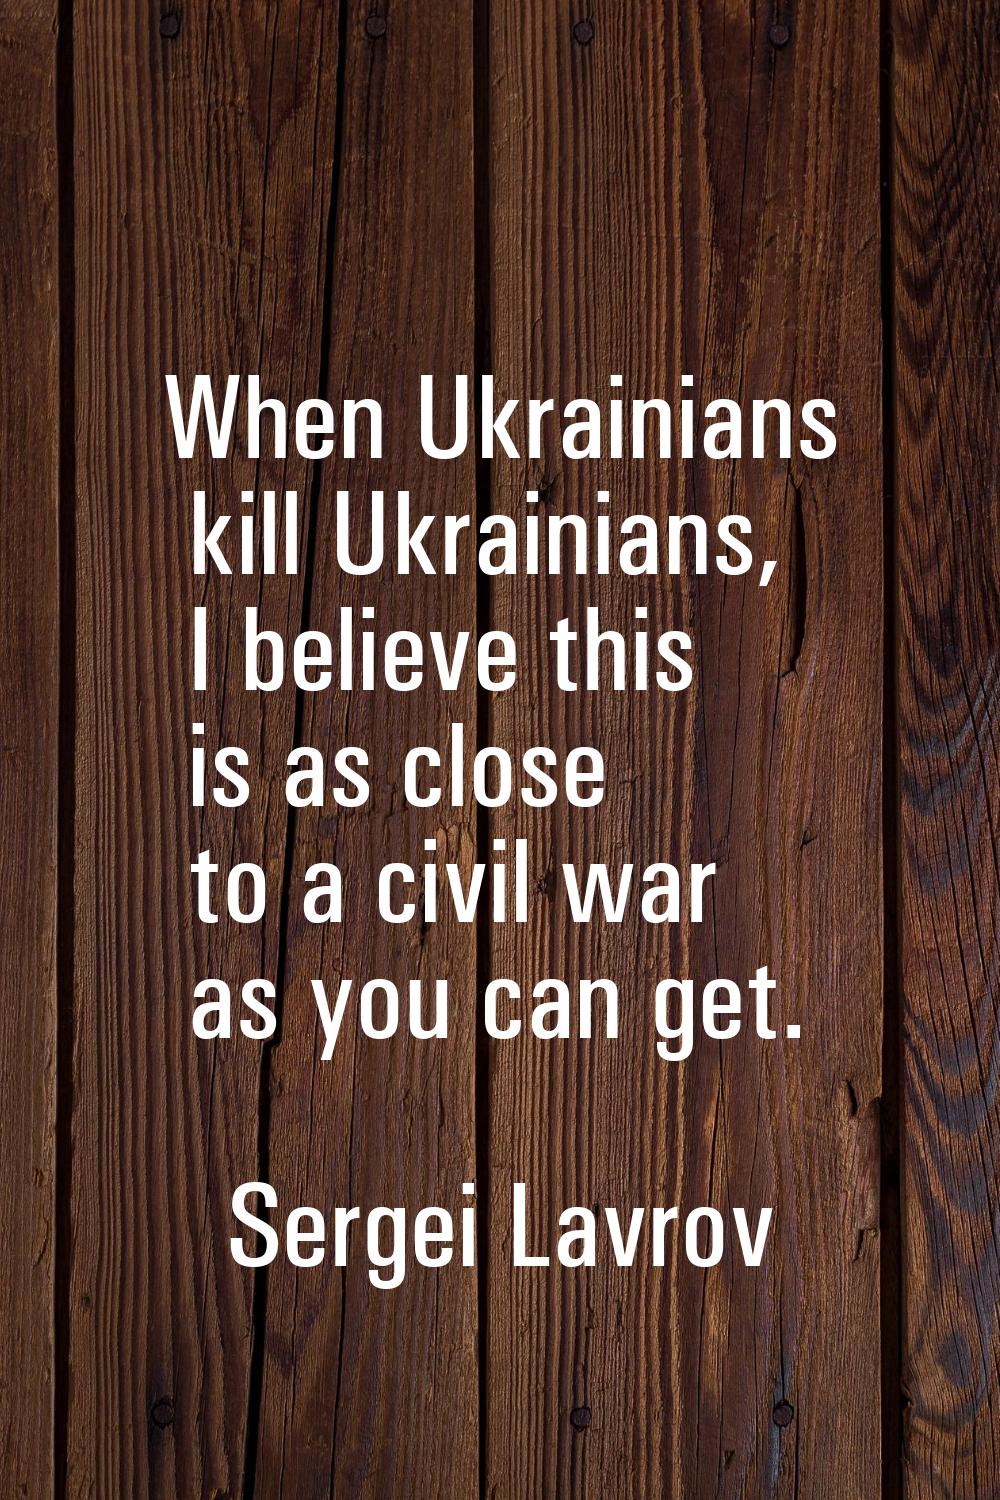 When Ukrainians kill Ukrainians, I believe this is as close to a civil war as you can get.